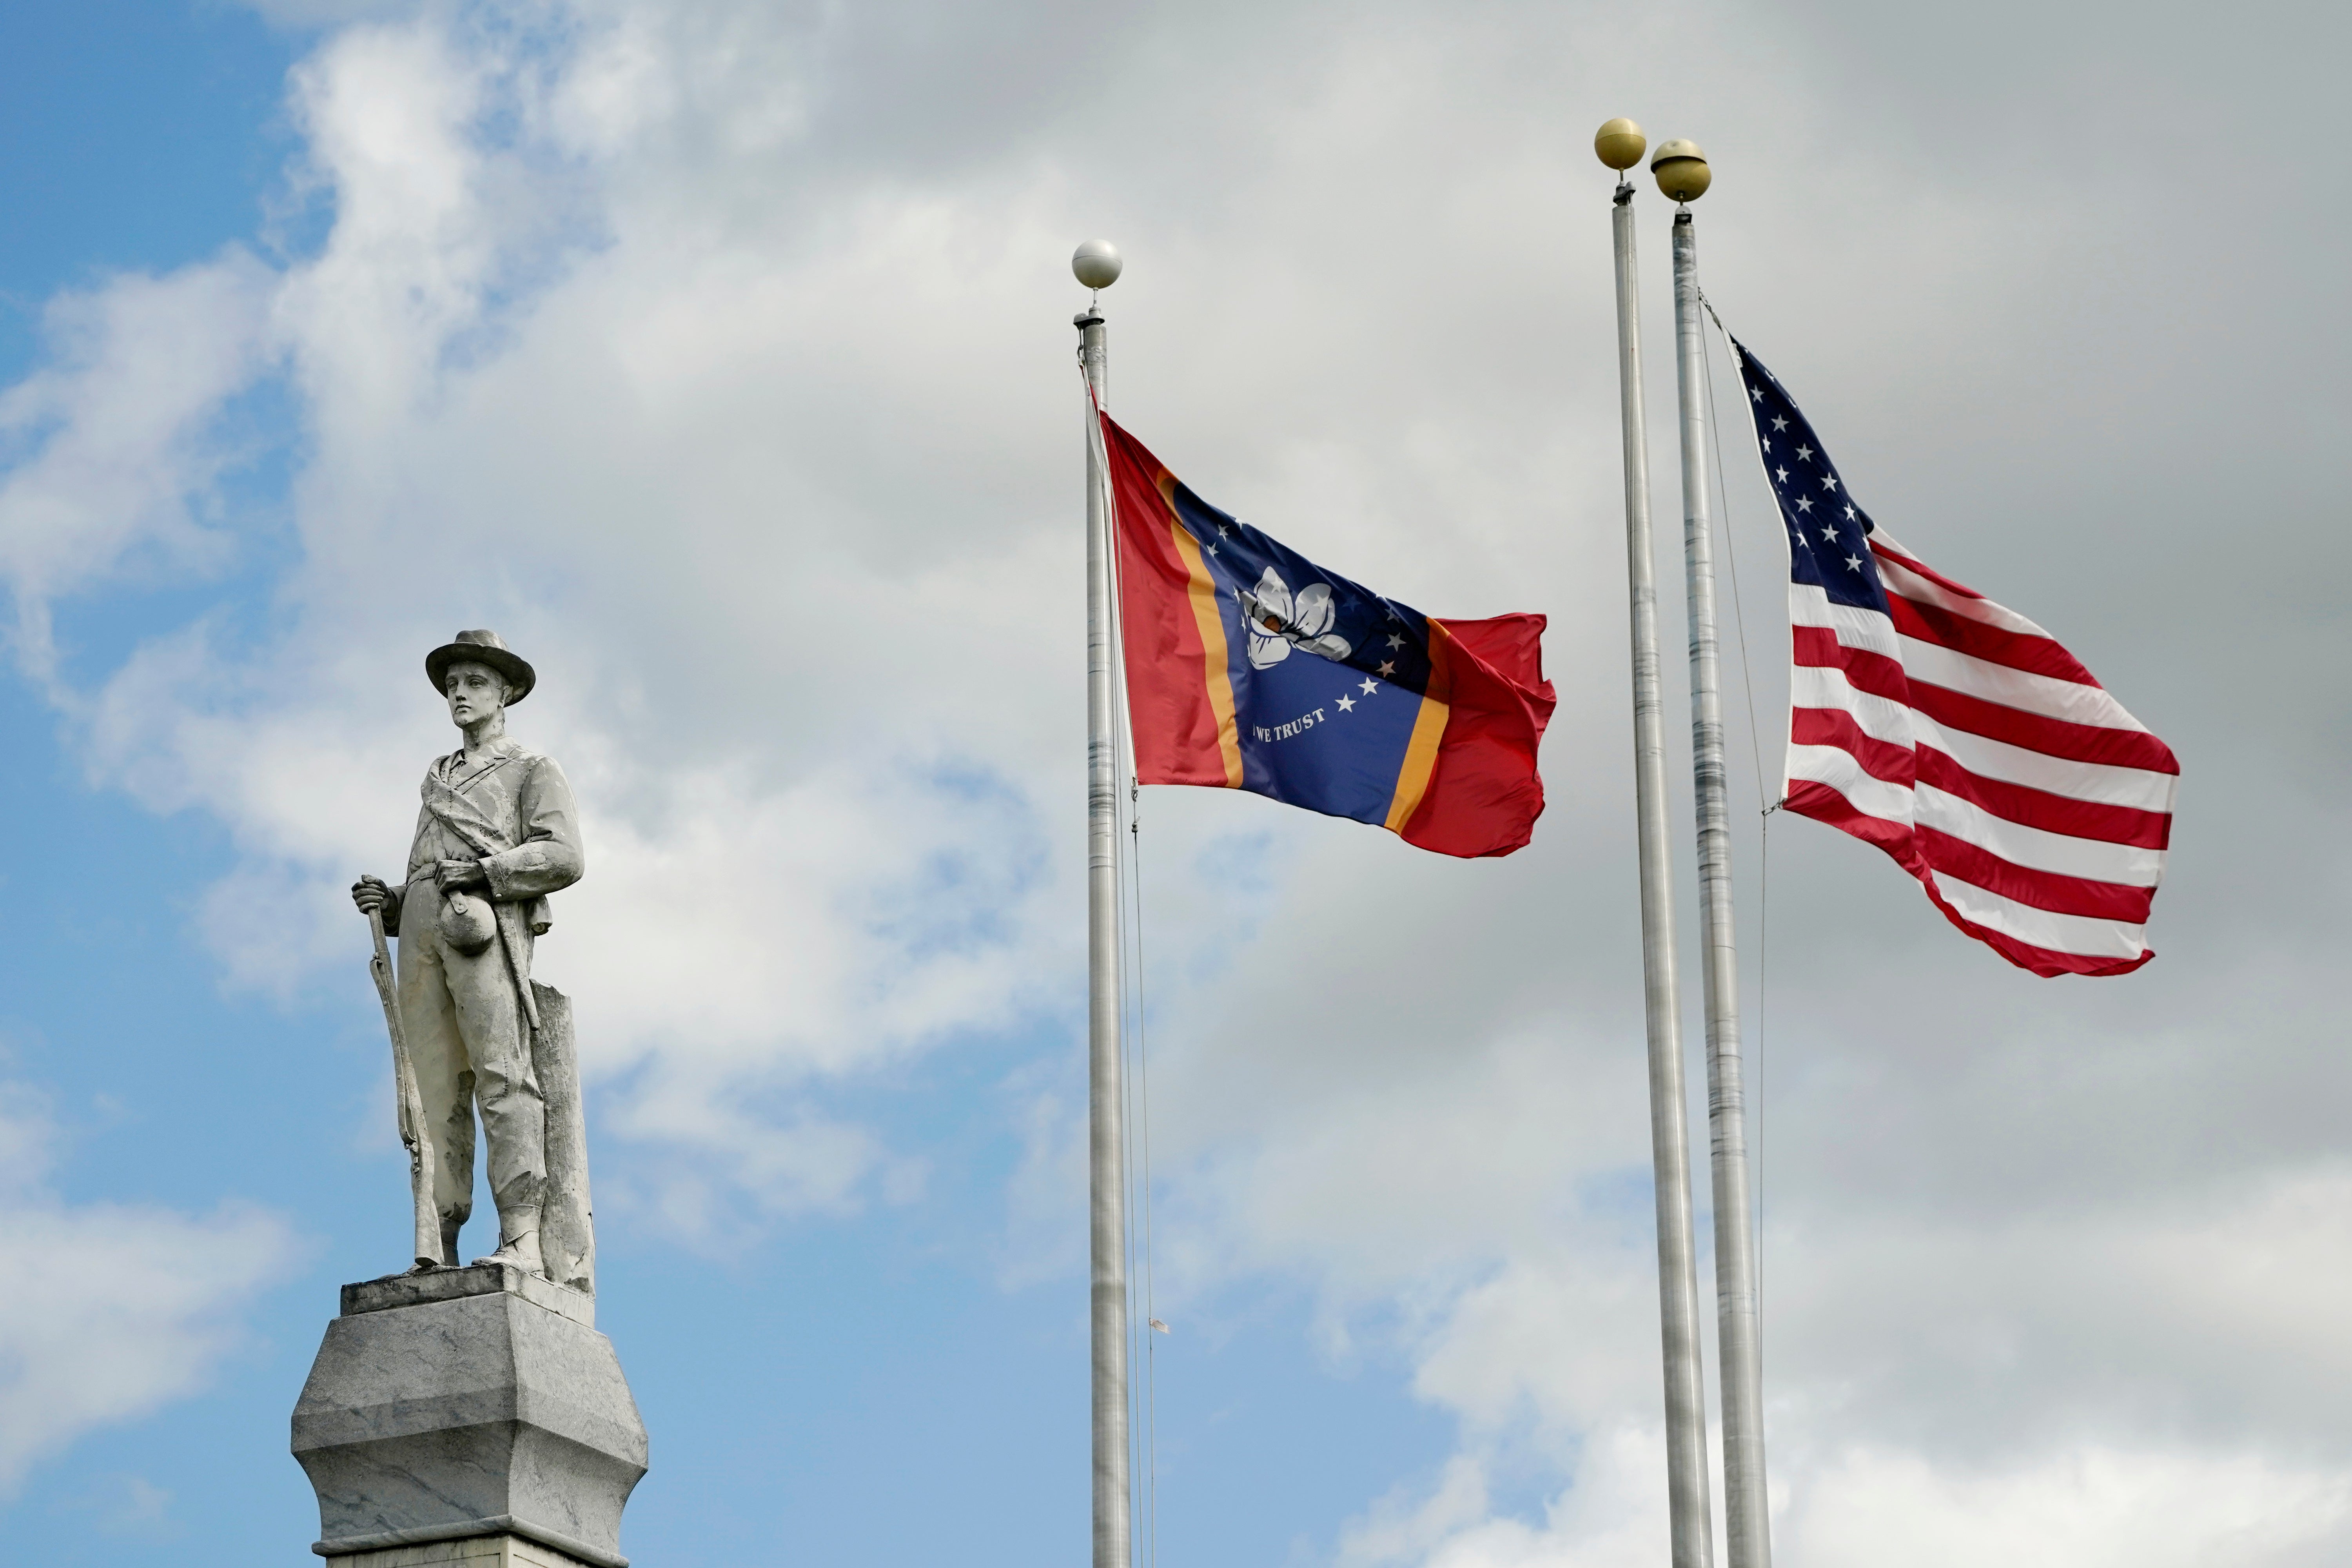 The South has been reassessing symbols of its Confederate past in recent years